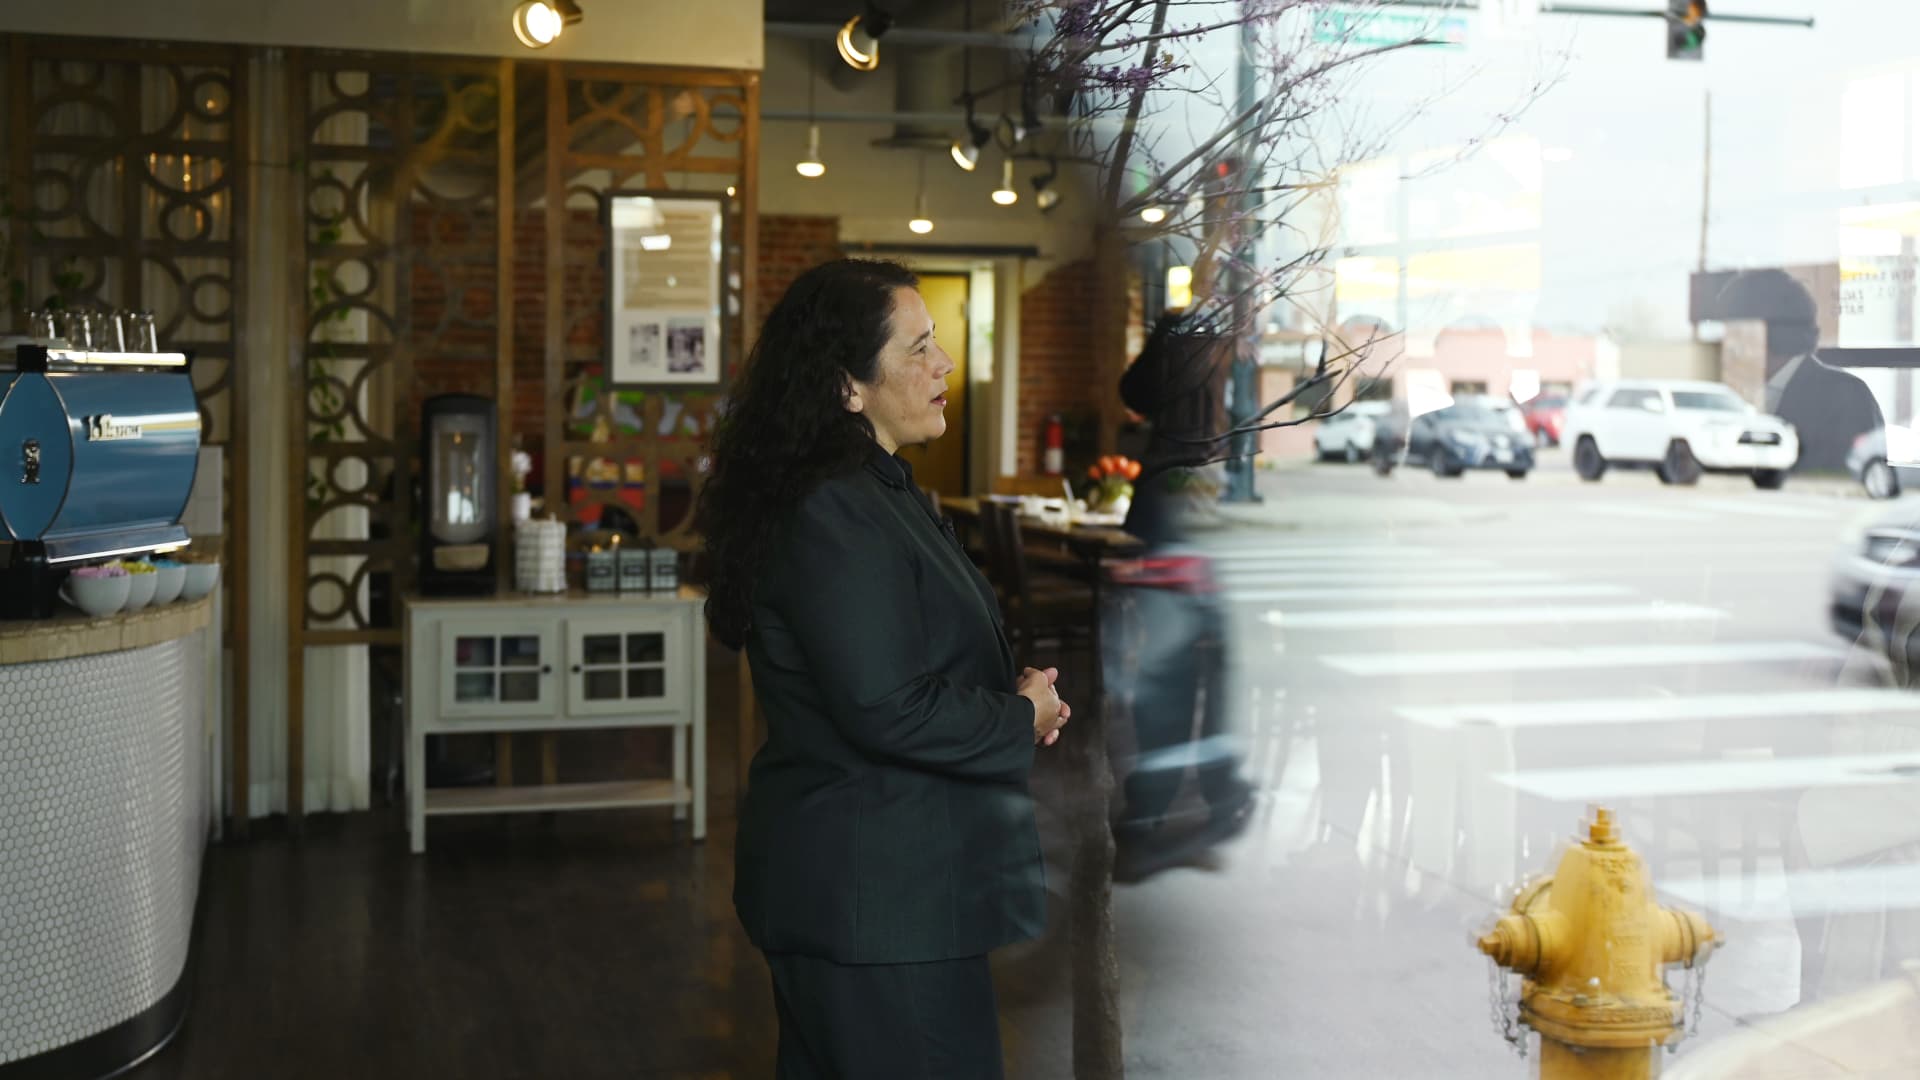 Seen through the window of Maria Empanada on South Broadway, Small Business Administration Administrator Isabella Guzman does an interview with a local television station on May 3, 2022 in Denver, Colorado.